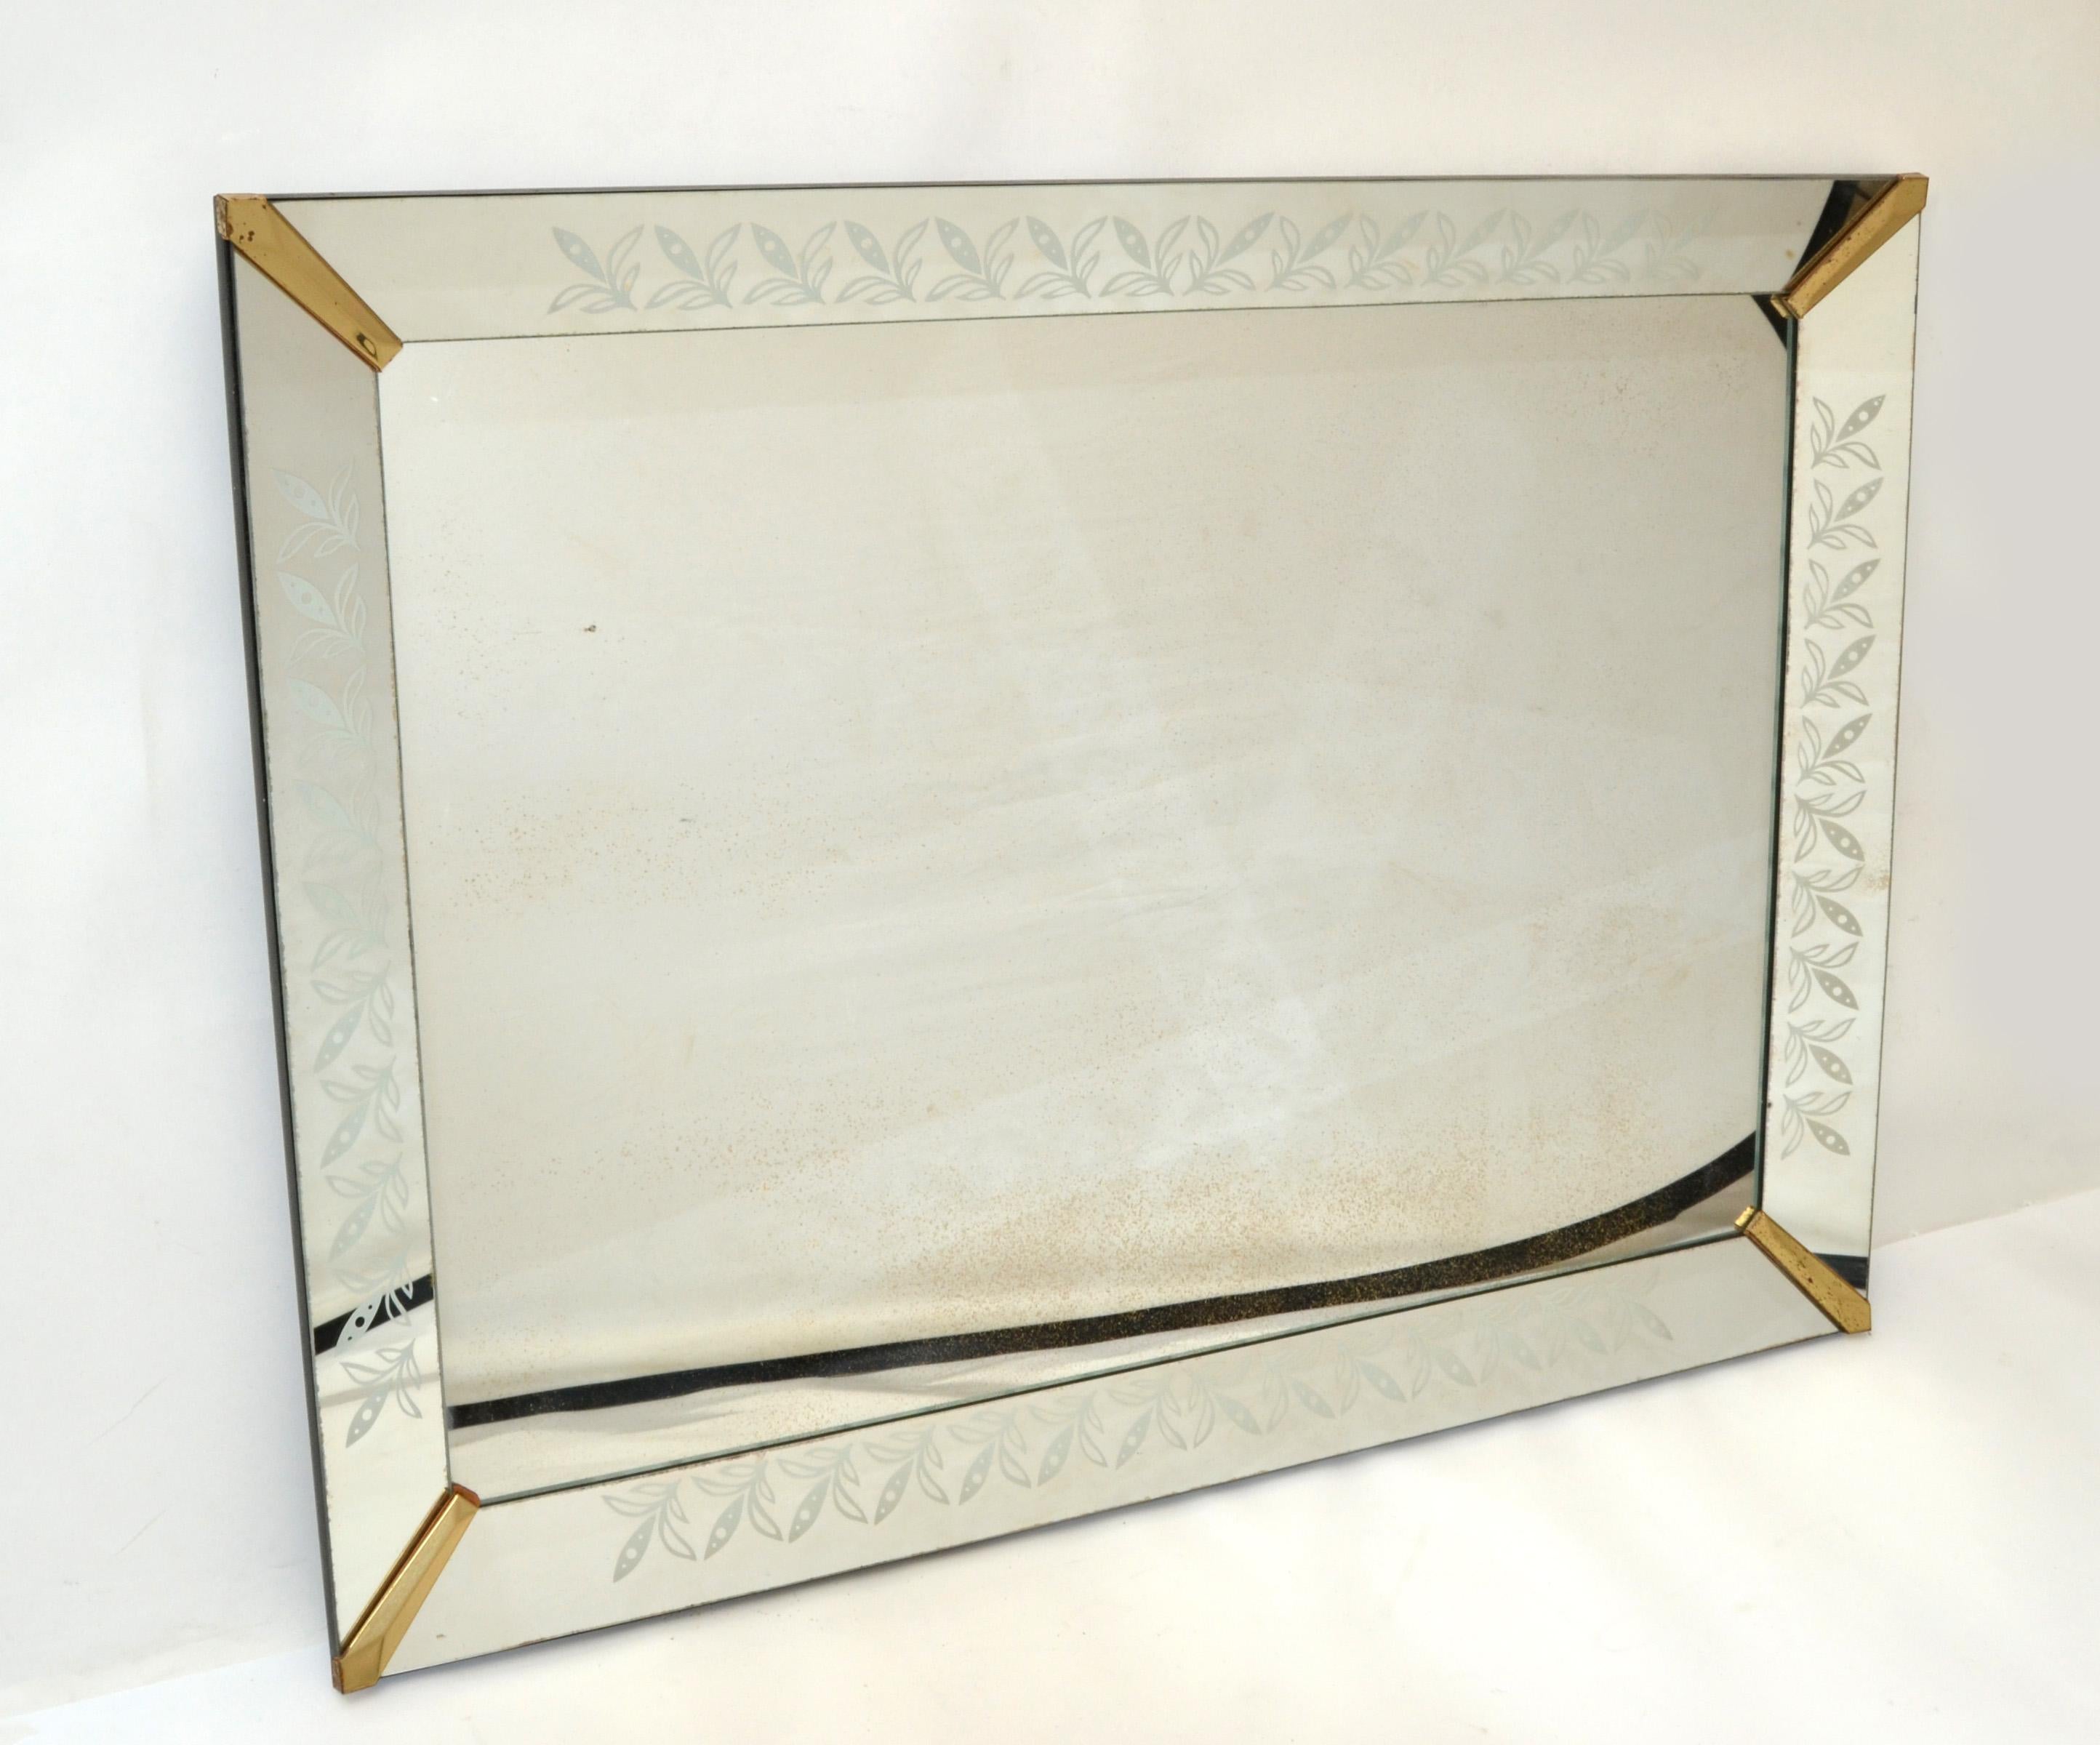 20th Century 1940s Art Deco Venetian Style Etched Wall Mirror with Brass Finished Corners For Sale